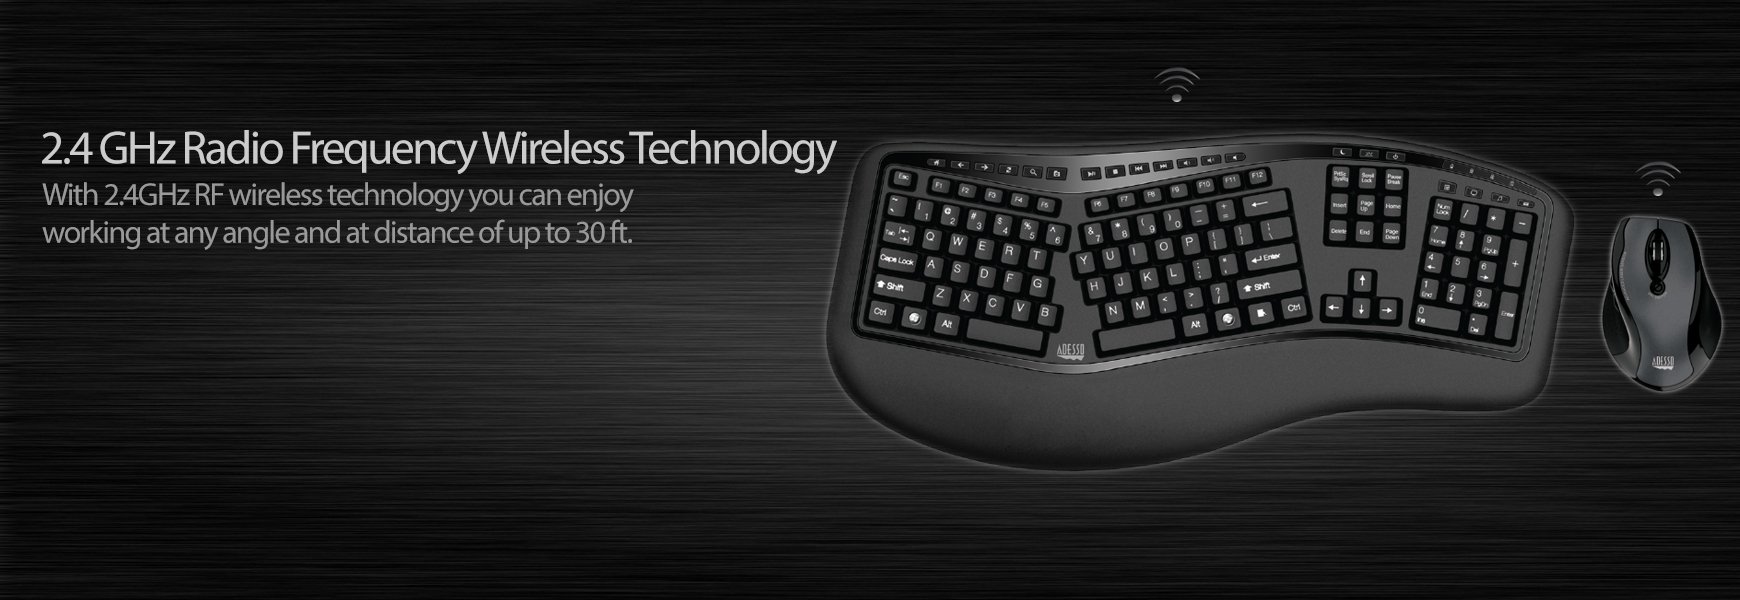 Adesso WKB-1500GB - Wireless Ergonomic Desktop Keyboard and Laser Mouse with Split Keys Design and Palm Rest for Comfort, Long Battery Life, Nano Receiver - Compatible for PC & Windows XP/7/8/10,Black